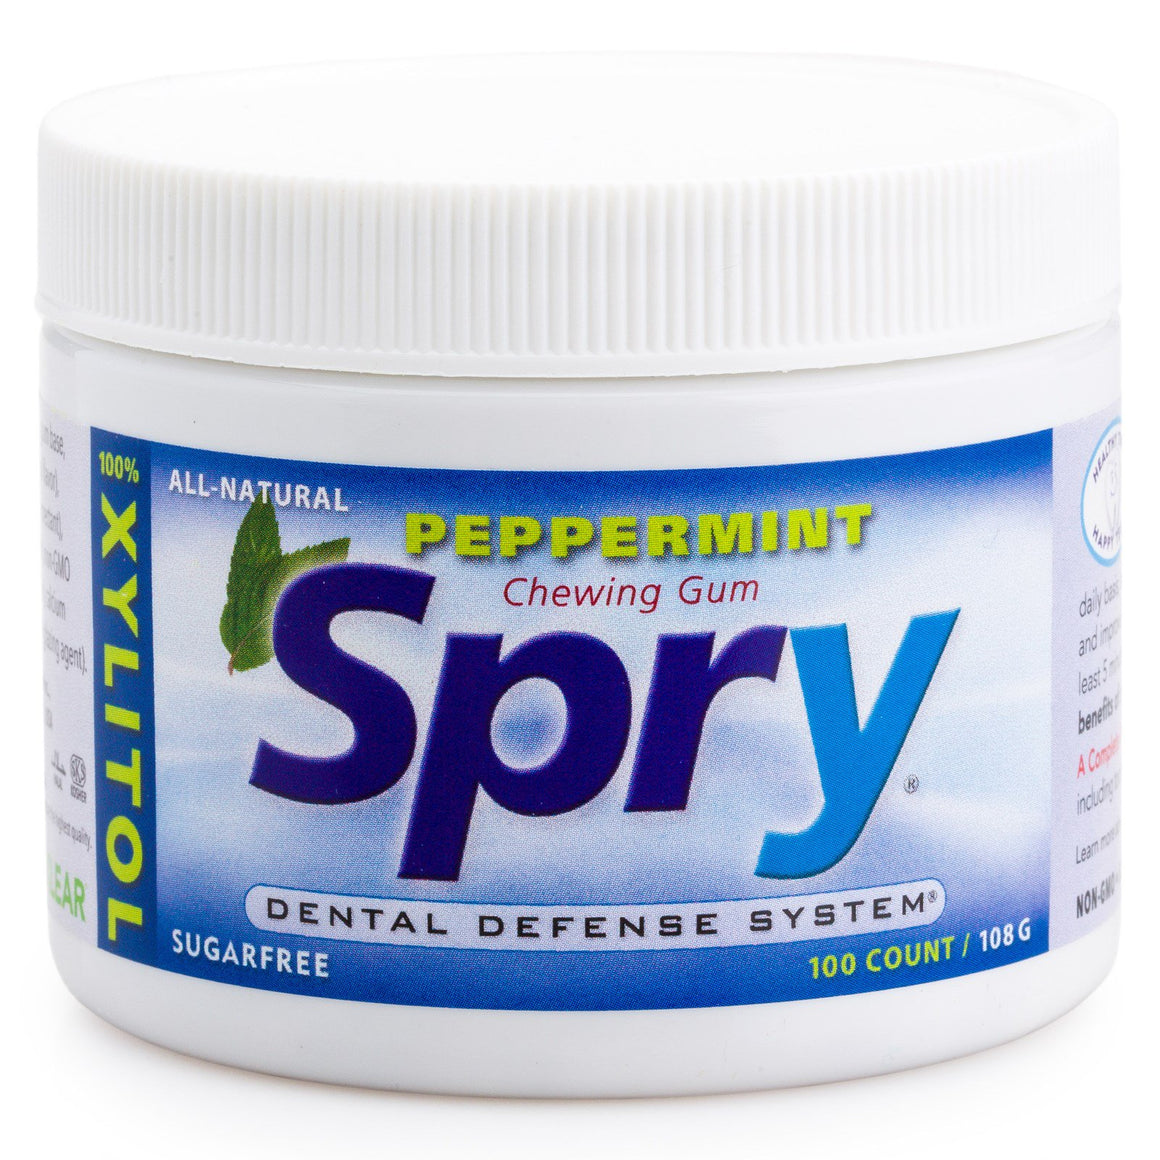 A jar of Spry Chewing Gum Peppermint With Xylitol